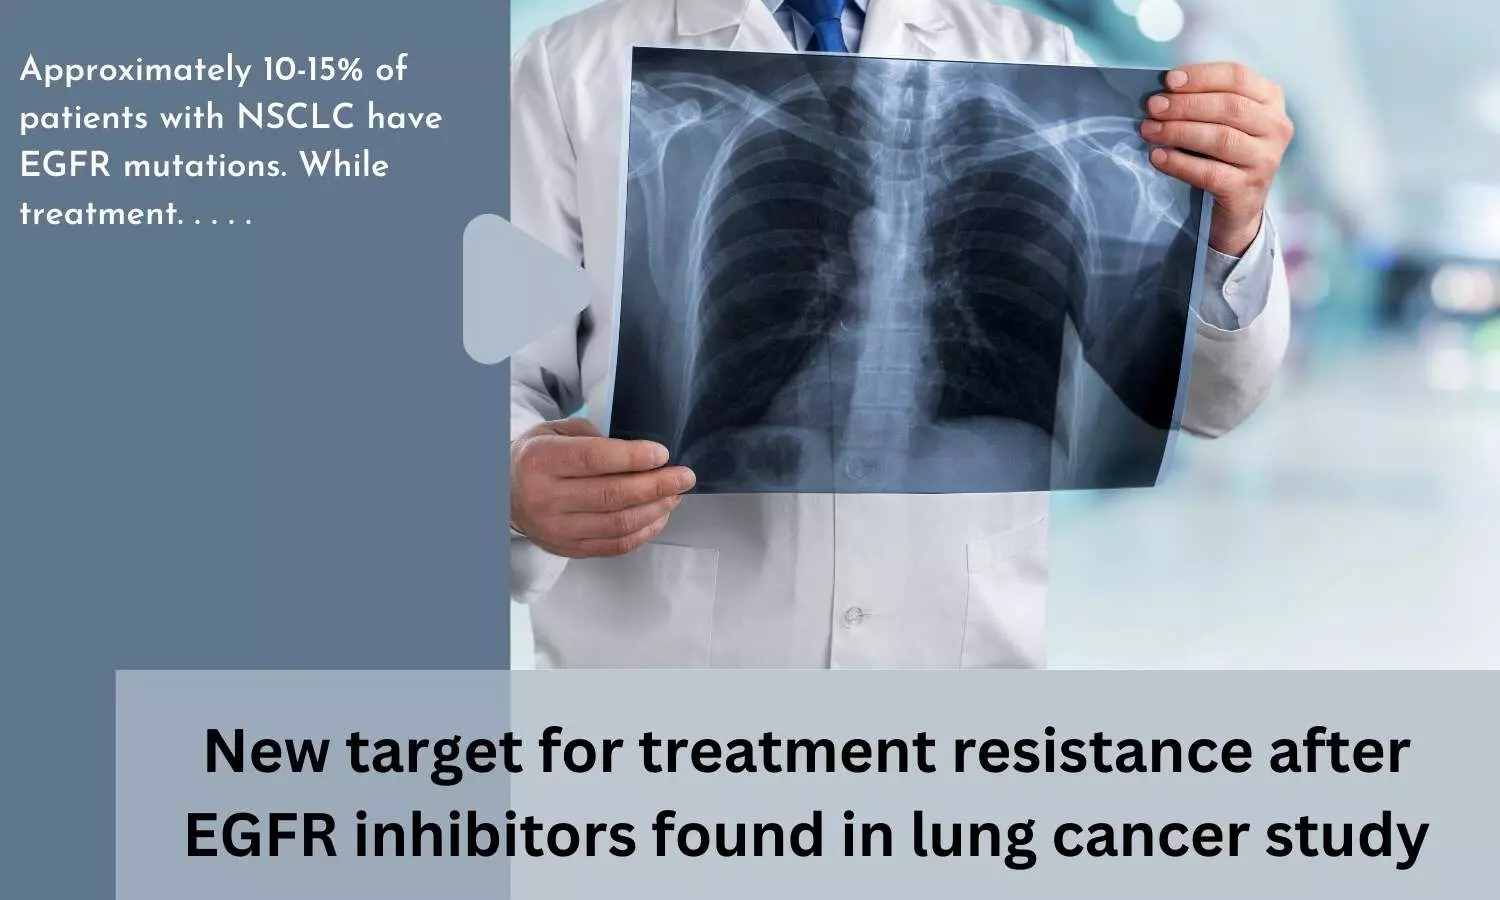 New target for treatment resistance after EGFR inhibitors found in lung cancer study